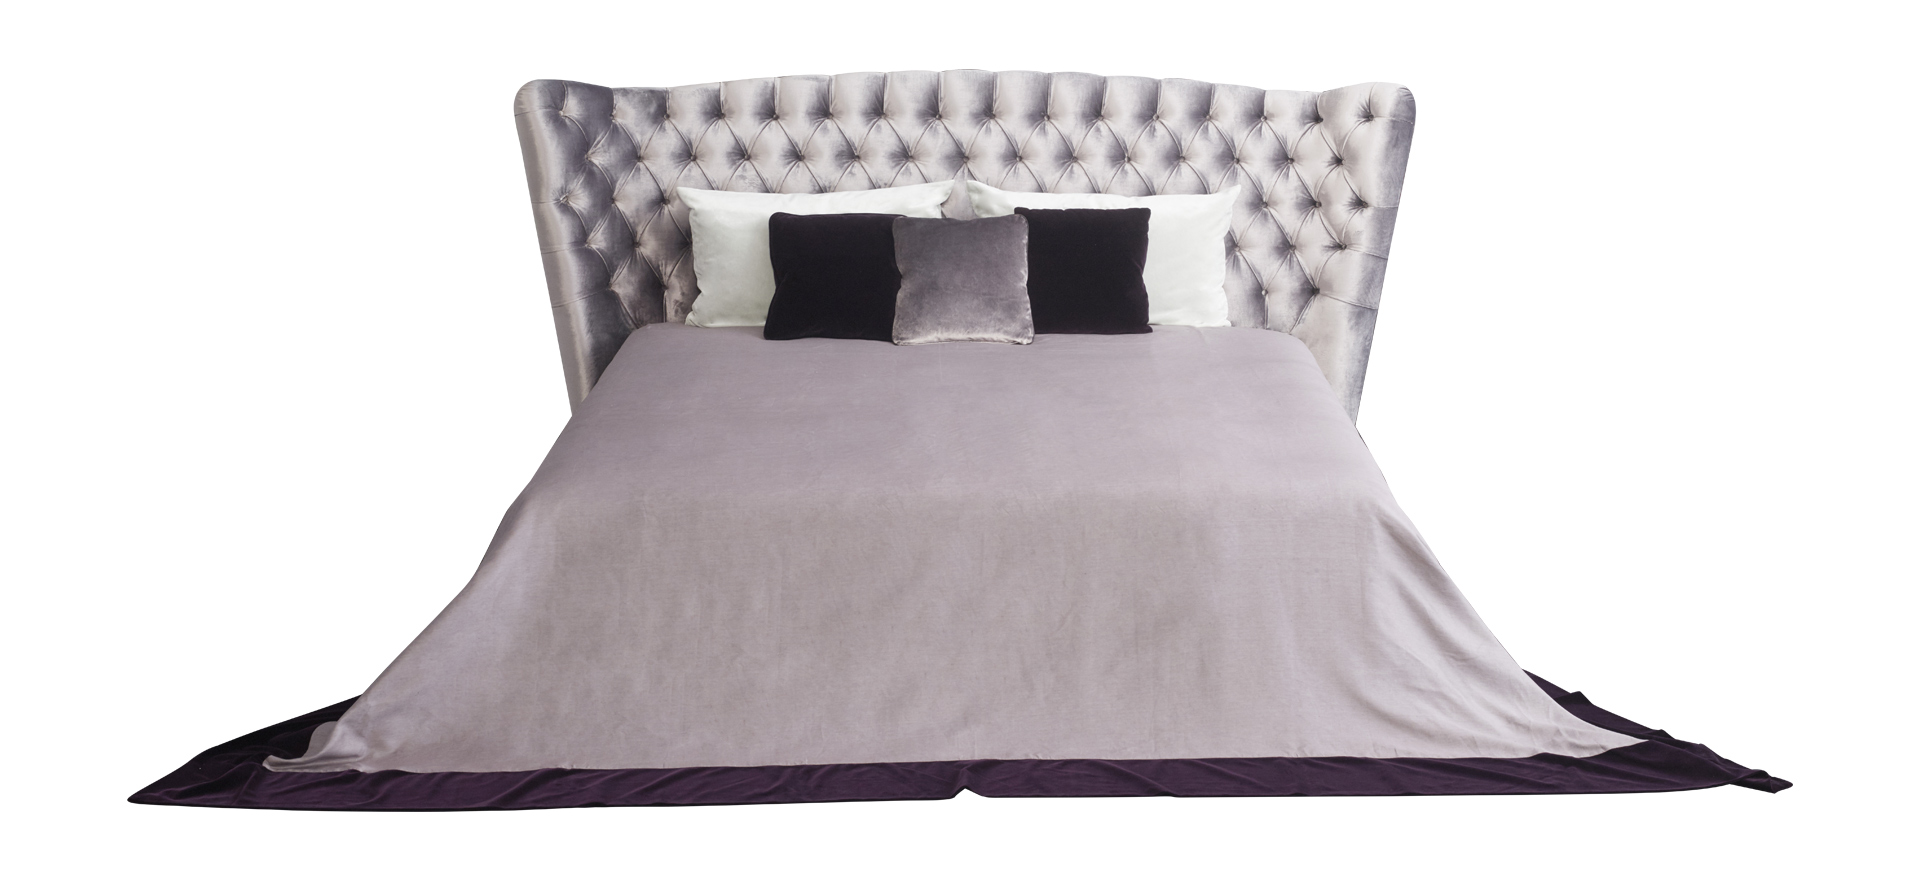 /mediaFrou%20Frou%20is%20a%20bed%20headboard%20with%20a%20bon%20ton%20style%20from%20the%20Promemoria's%20catalogue%20|%20Promemoria